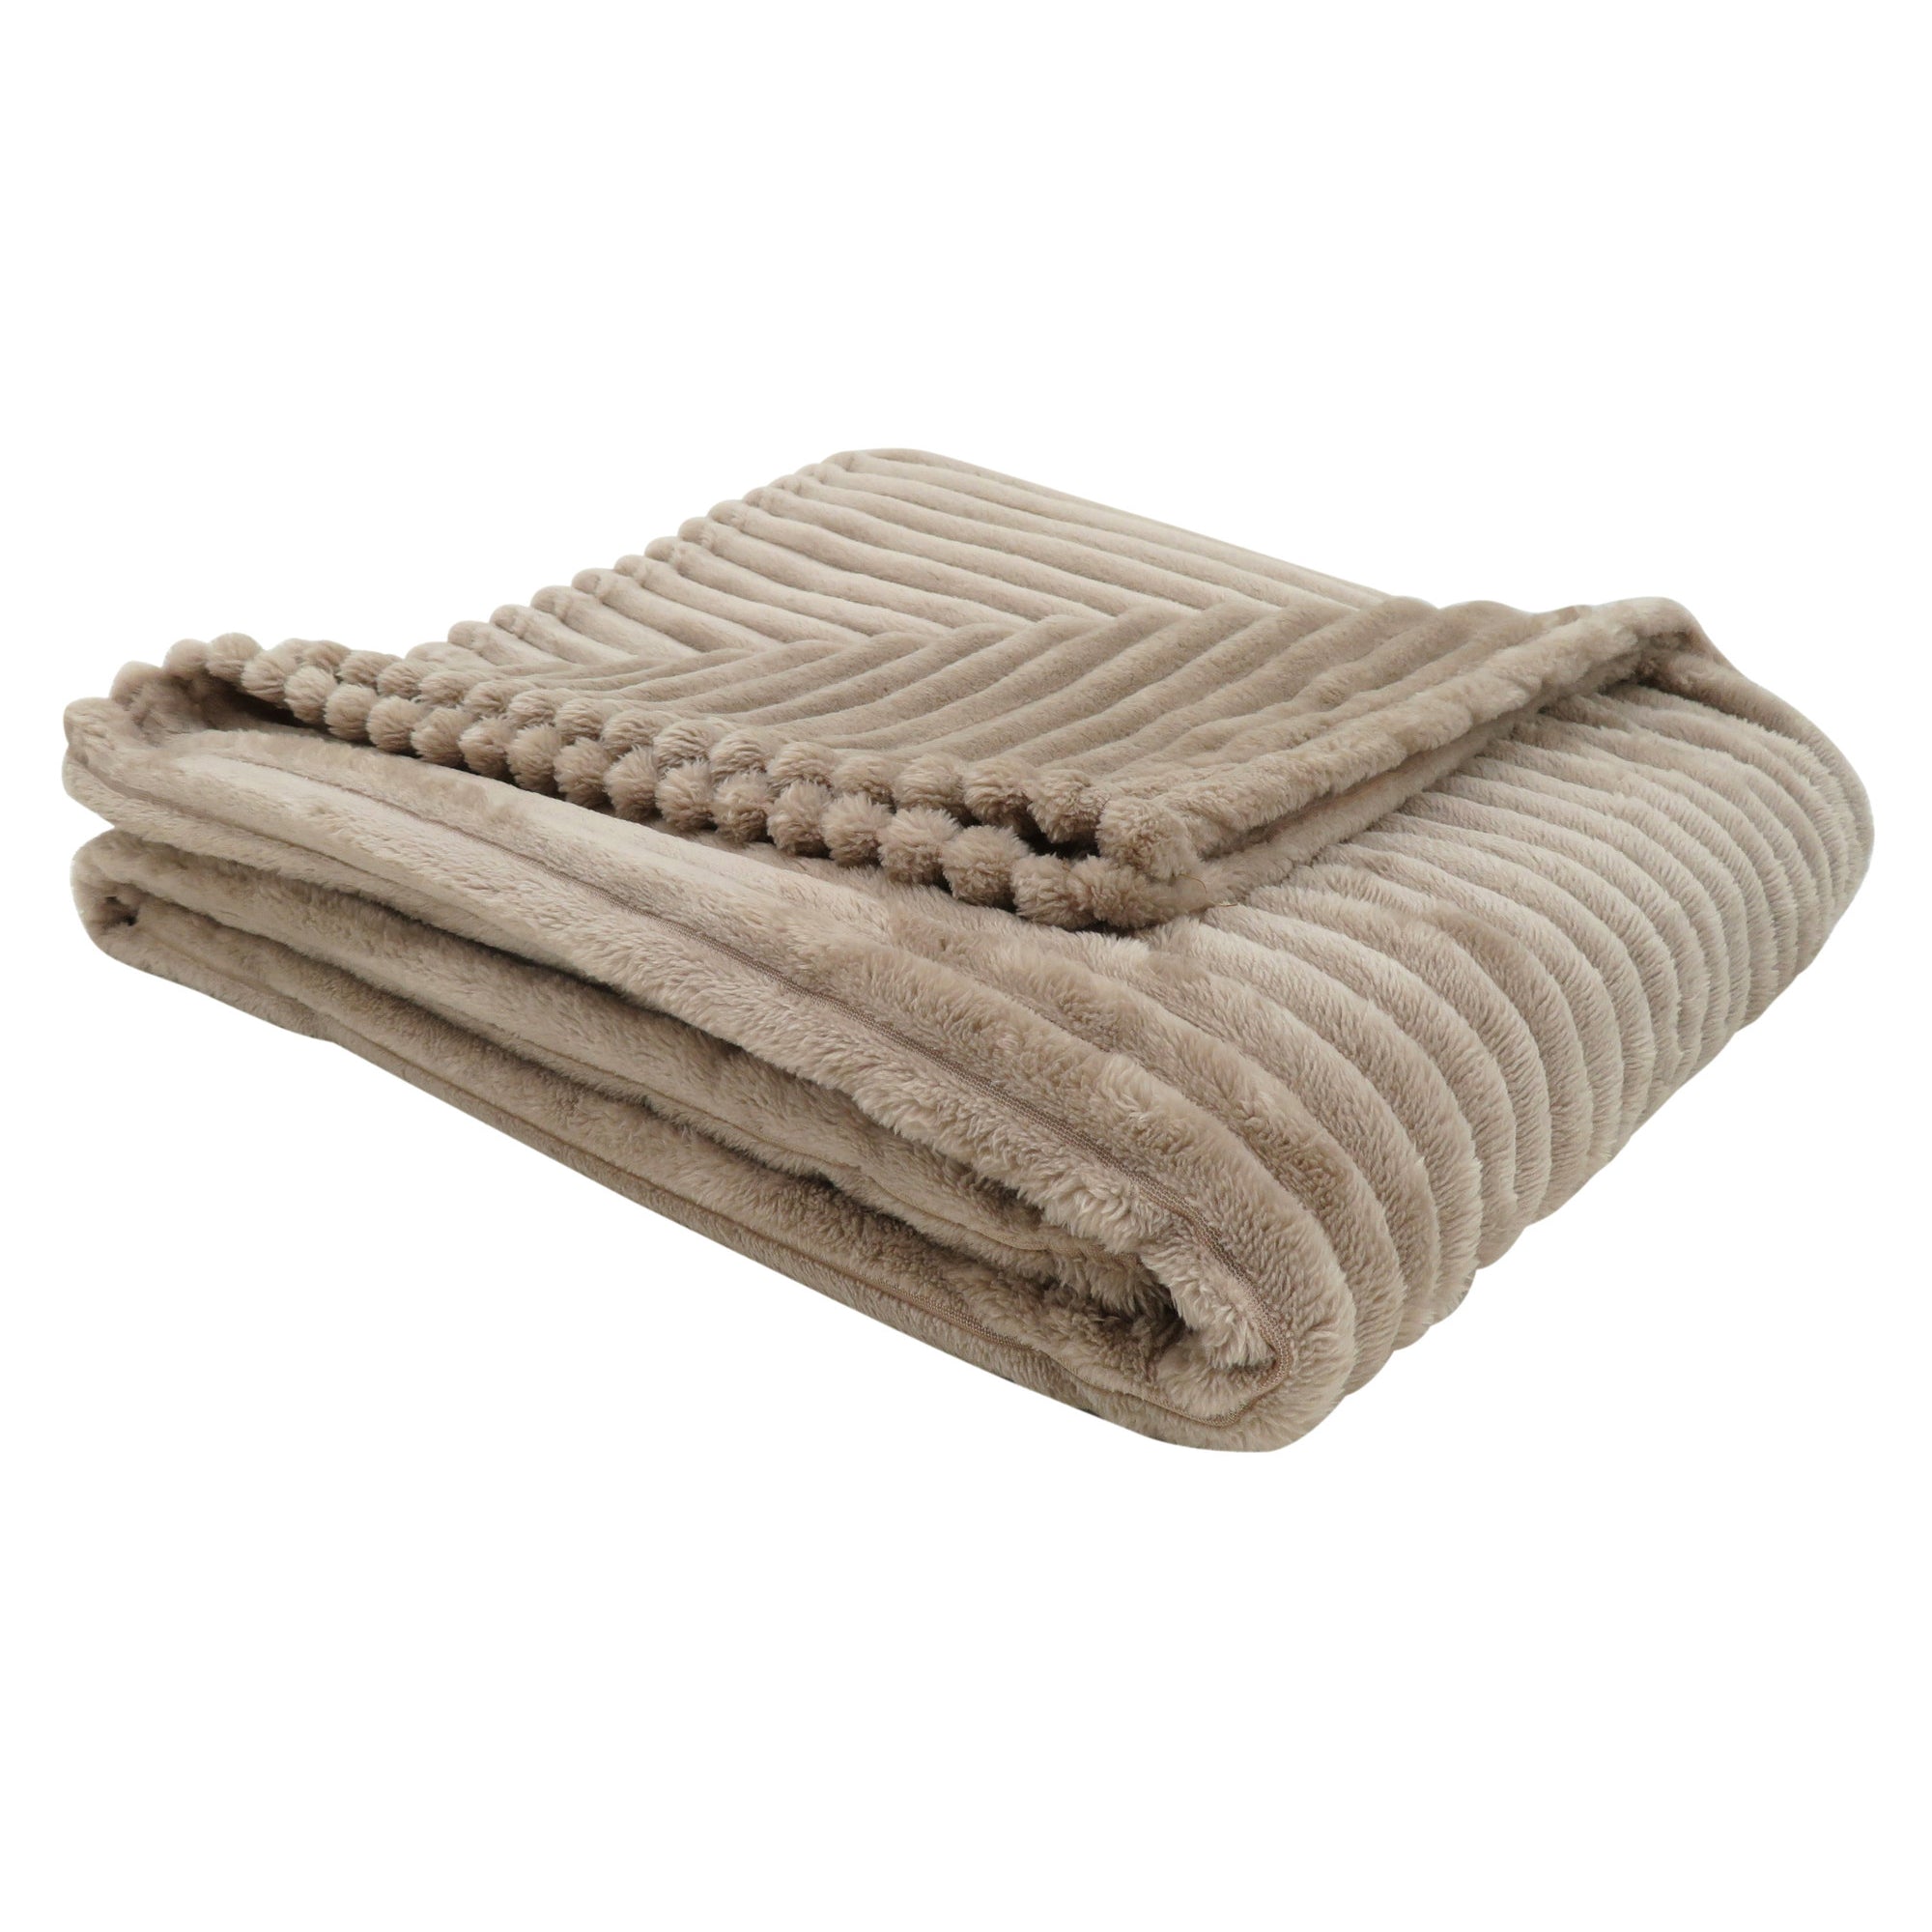 Throw - 60 X 50 / Beige Ultra Soft Ribbed Style